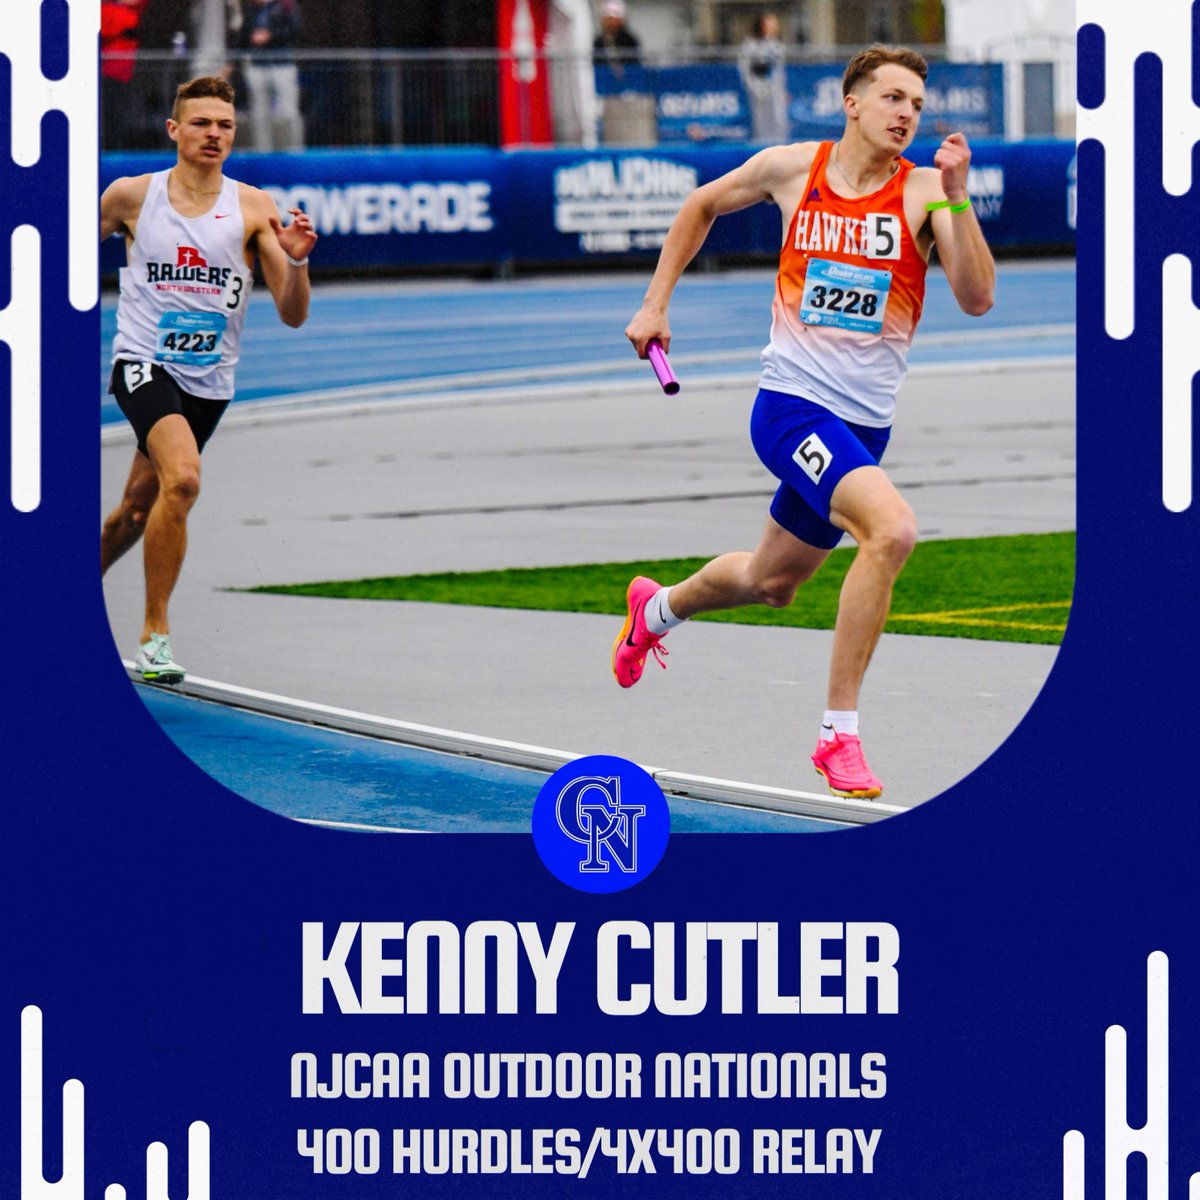 Congratulations to Alumnus Kenny Cutler who qualifyed for the NJCAA outdoor nationals in the 400 meter hurdles and the 4x400 meter relay at the University of Louisiana-Lafayette. Good luck Kenny!
#RoyalWay